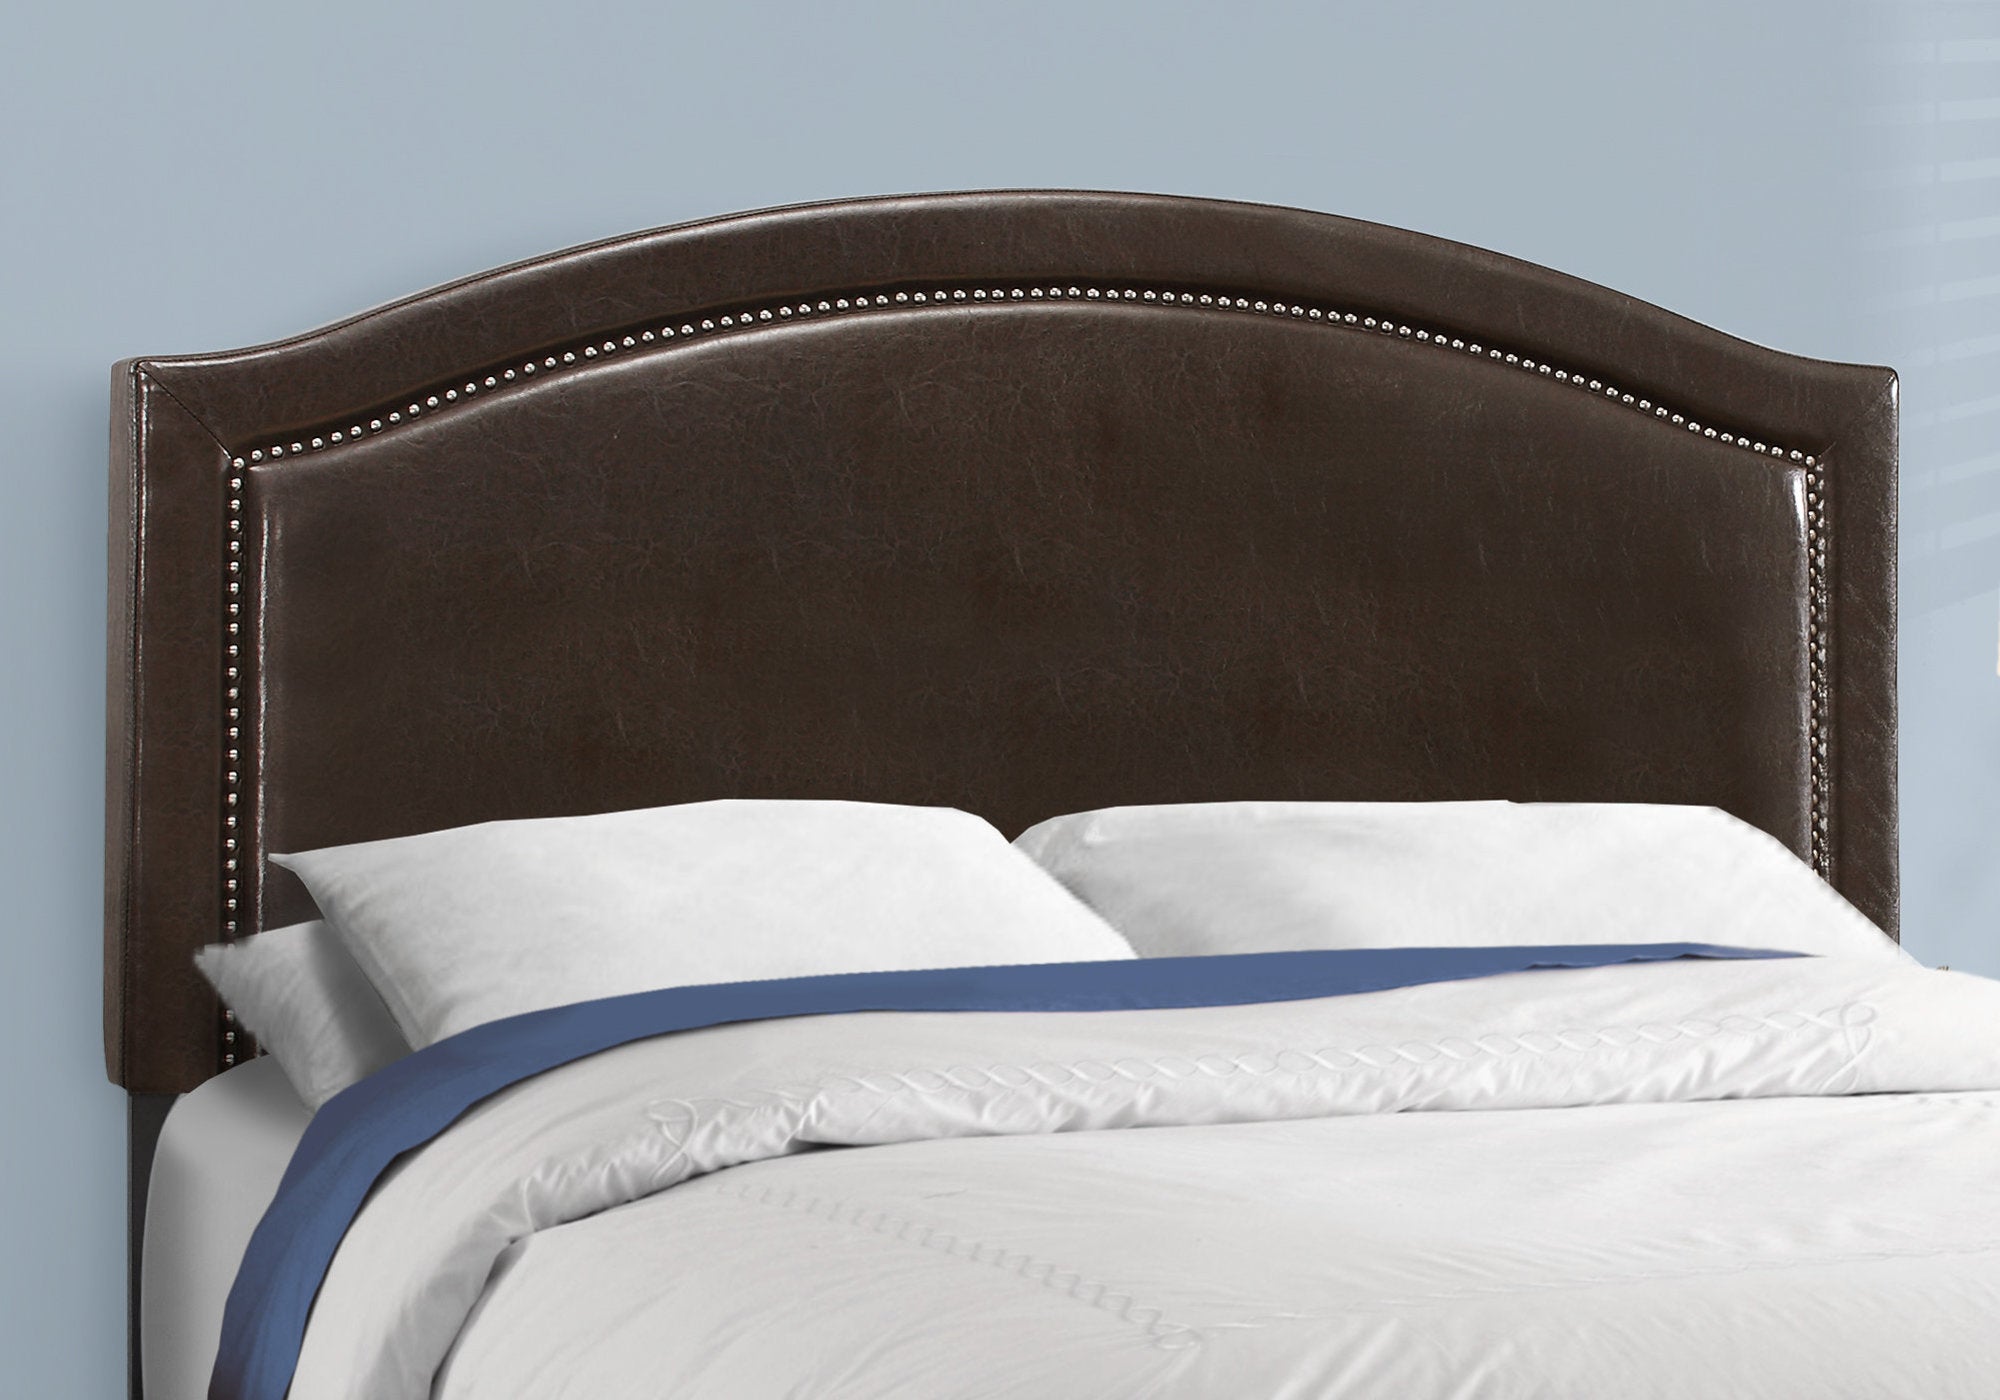 Bed - Queen Size / Brown Leather-Look With Brass Trim